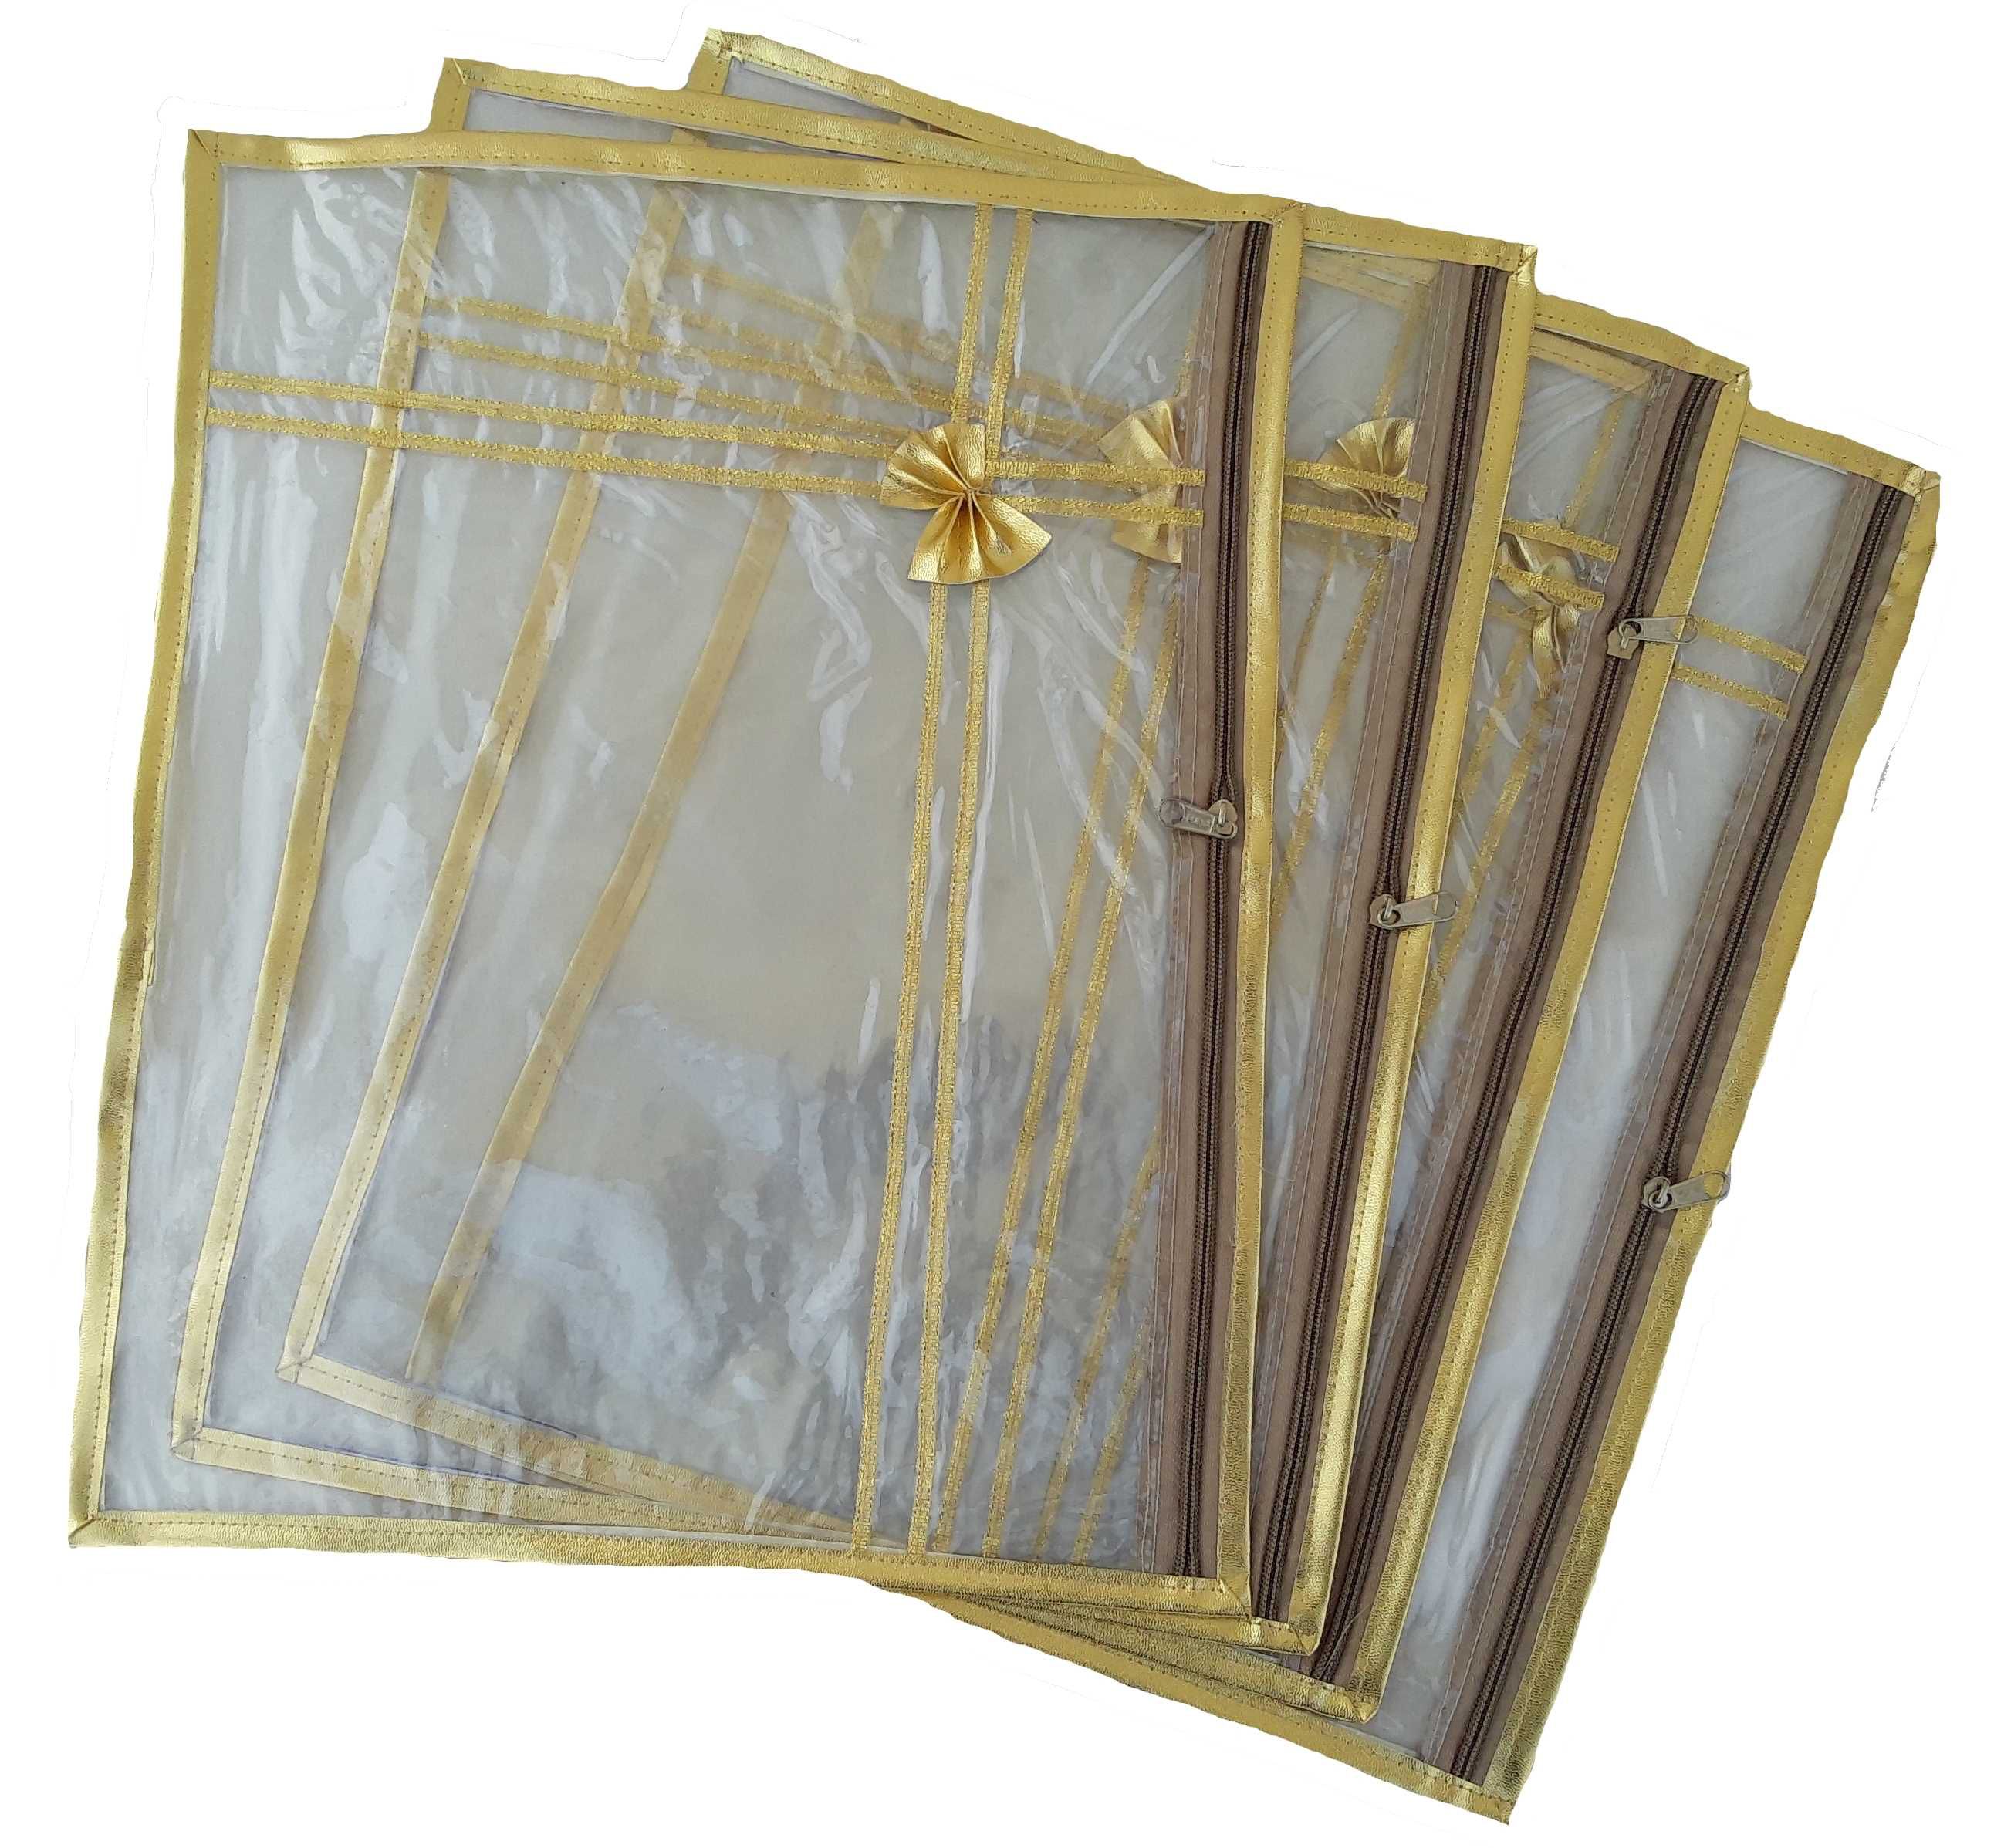 Buy Indi Bargain Gold Saree Covers at Best Prices in India Snapdeal